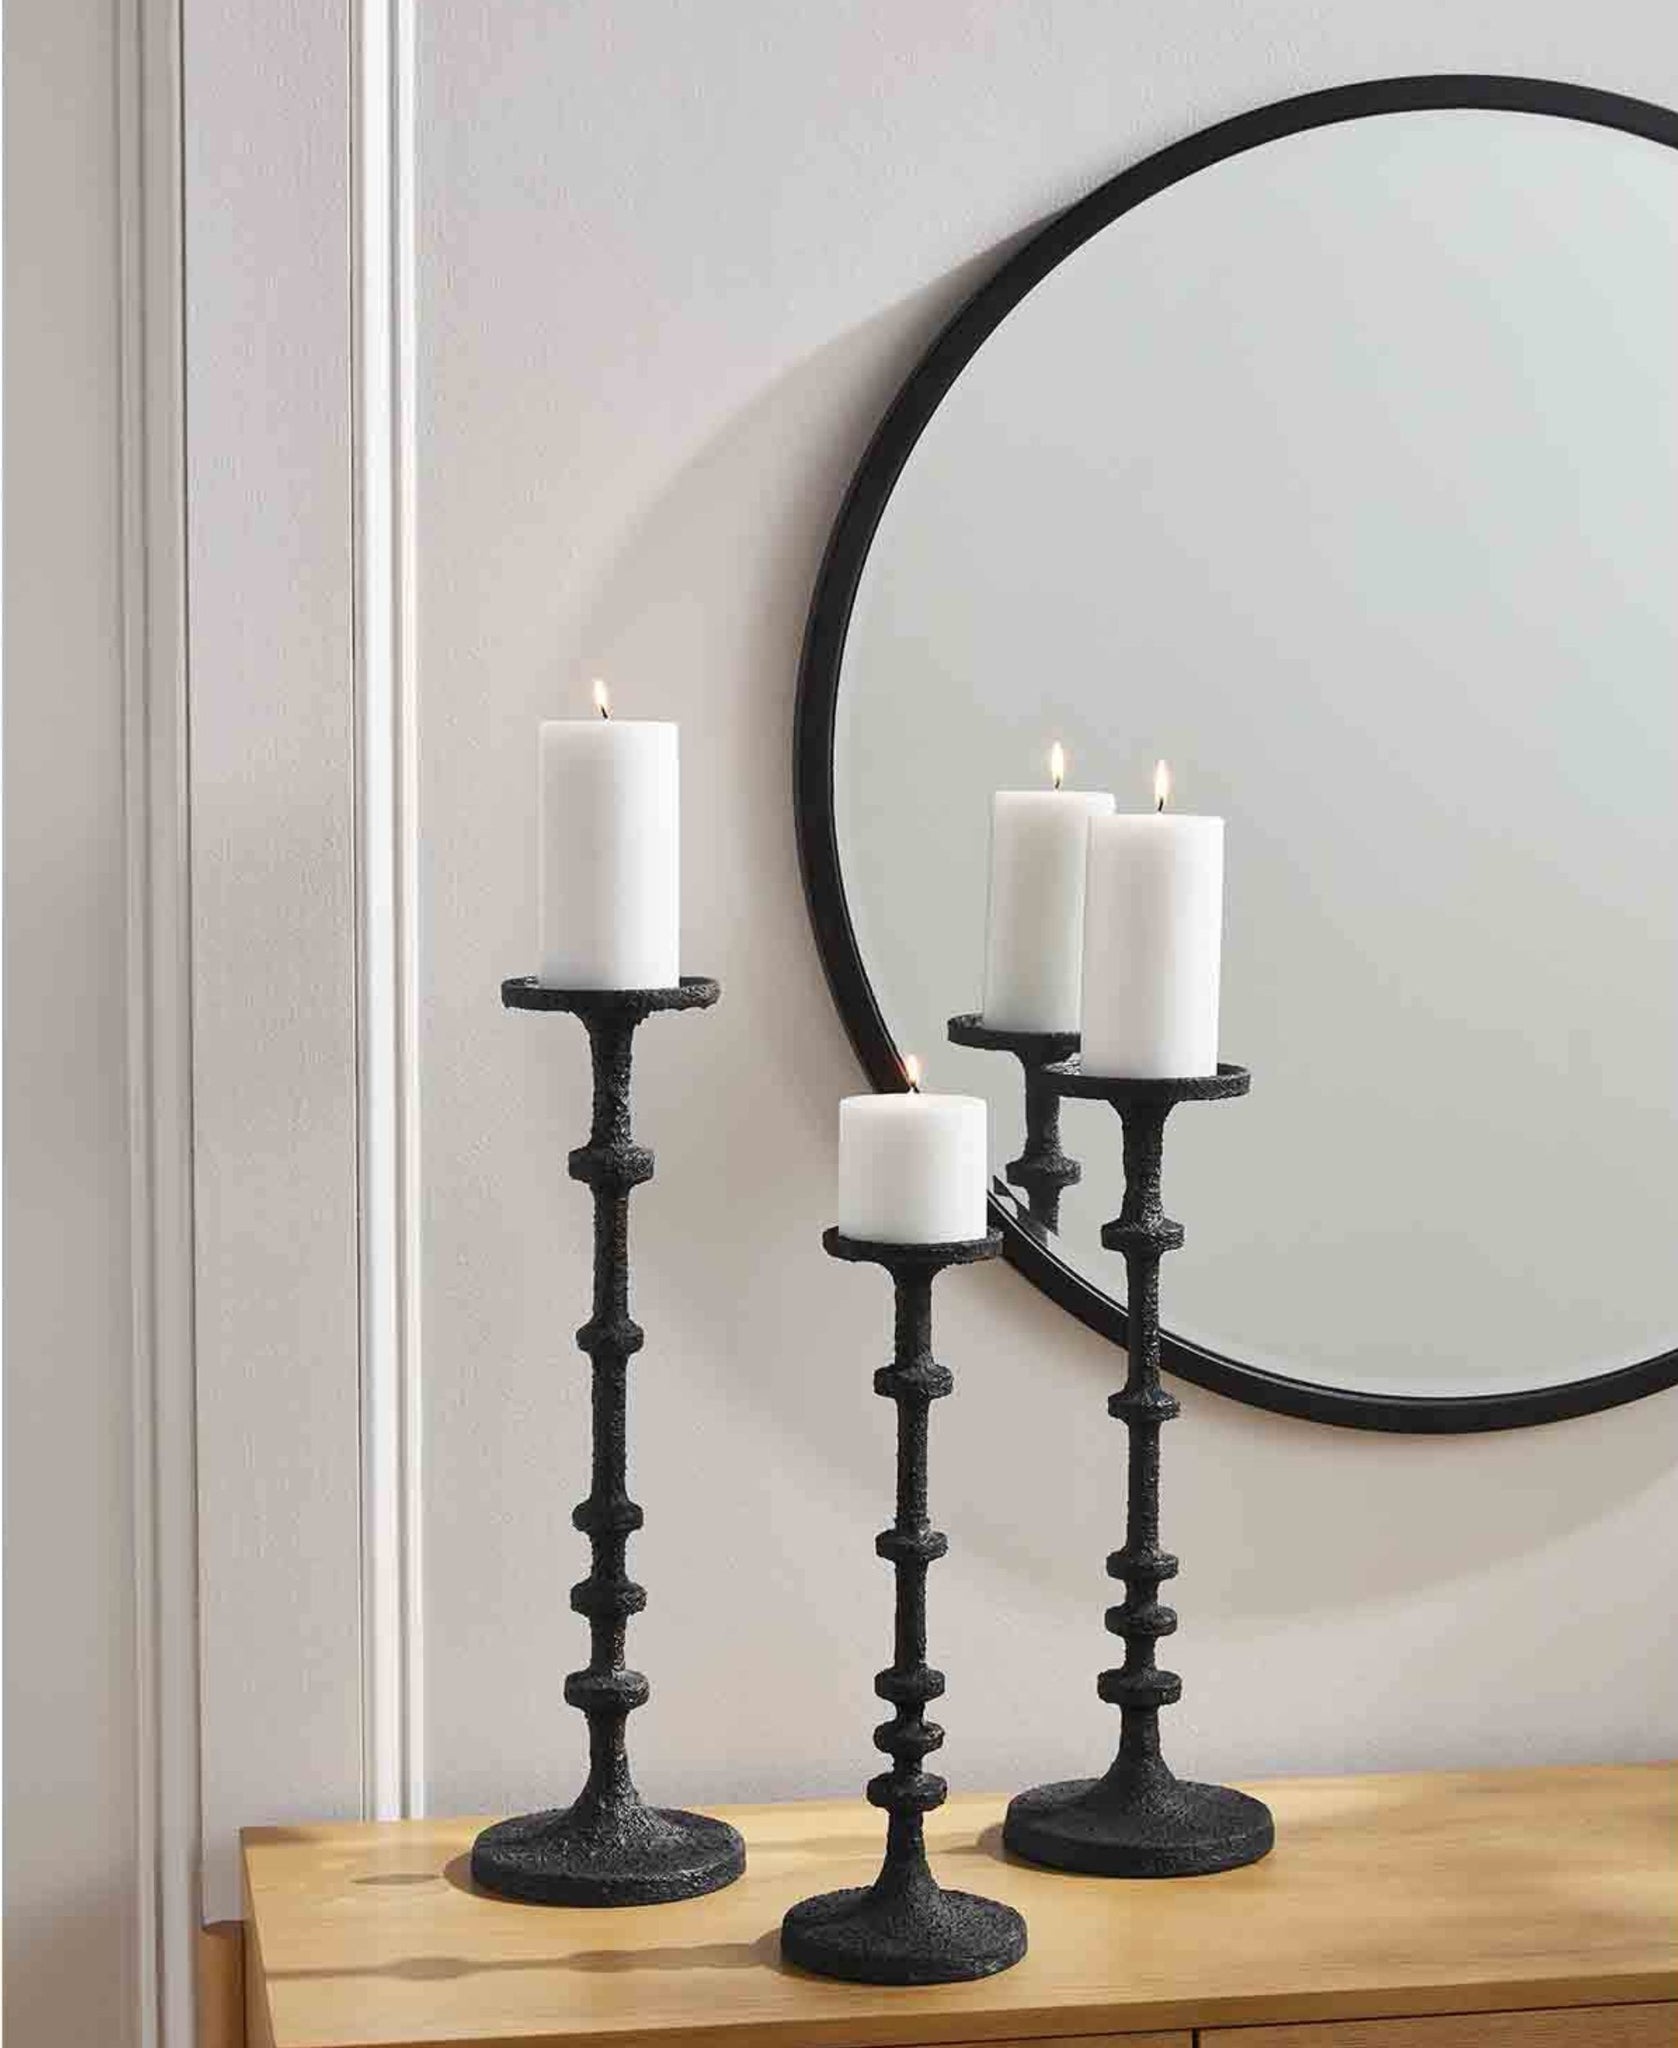  Matte Black Candle Holders Set of 3 - Metal Candle